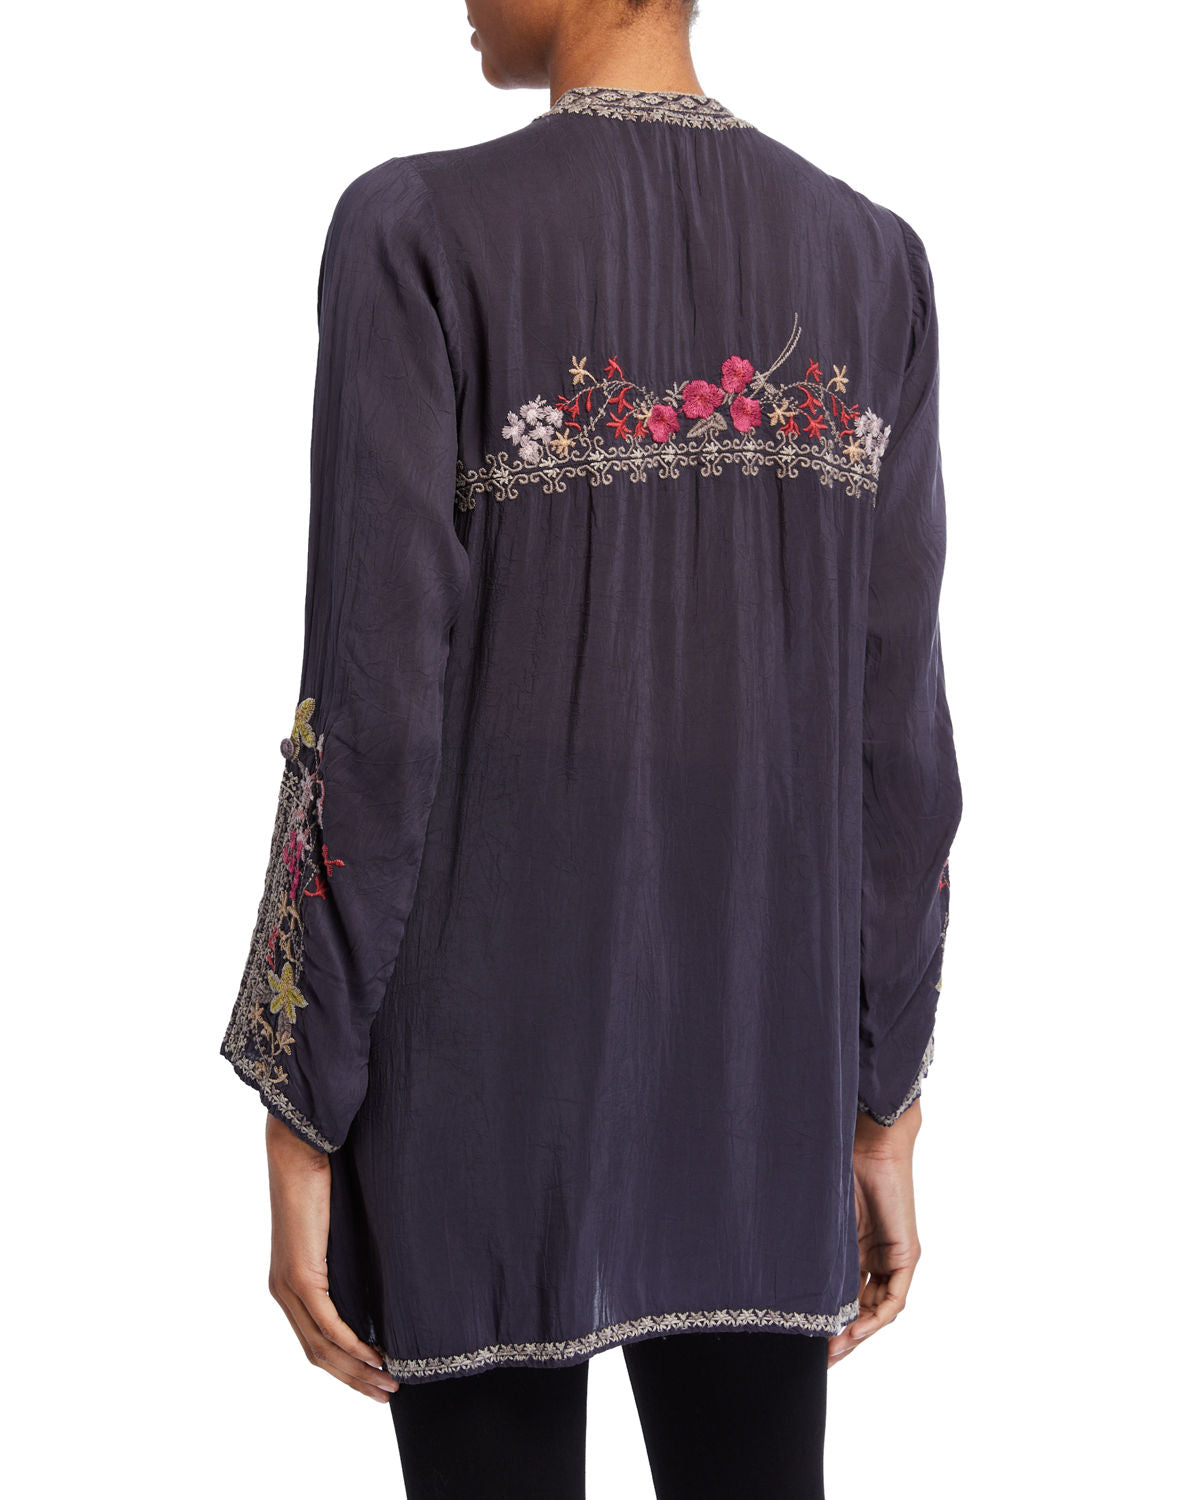 Johnny Was Women's Lilianna Gray Embroidered Tunic